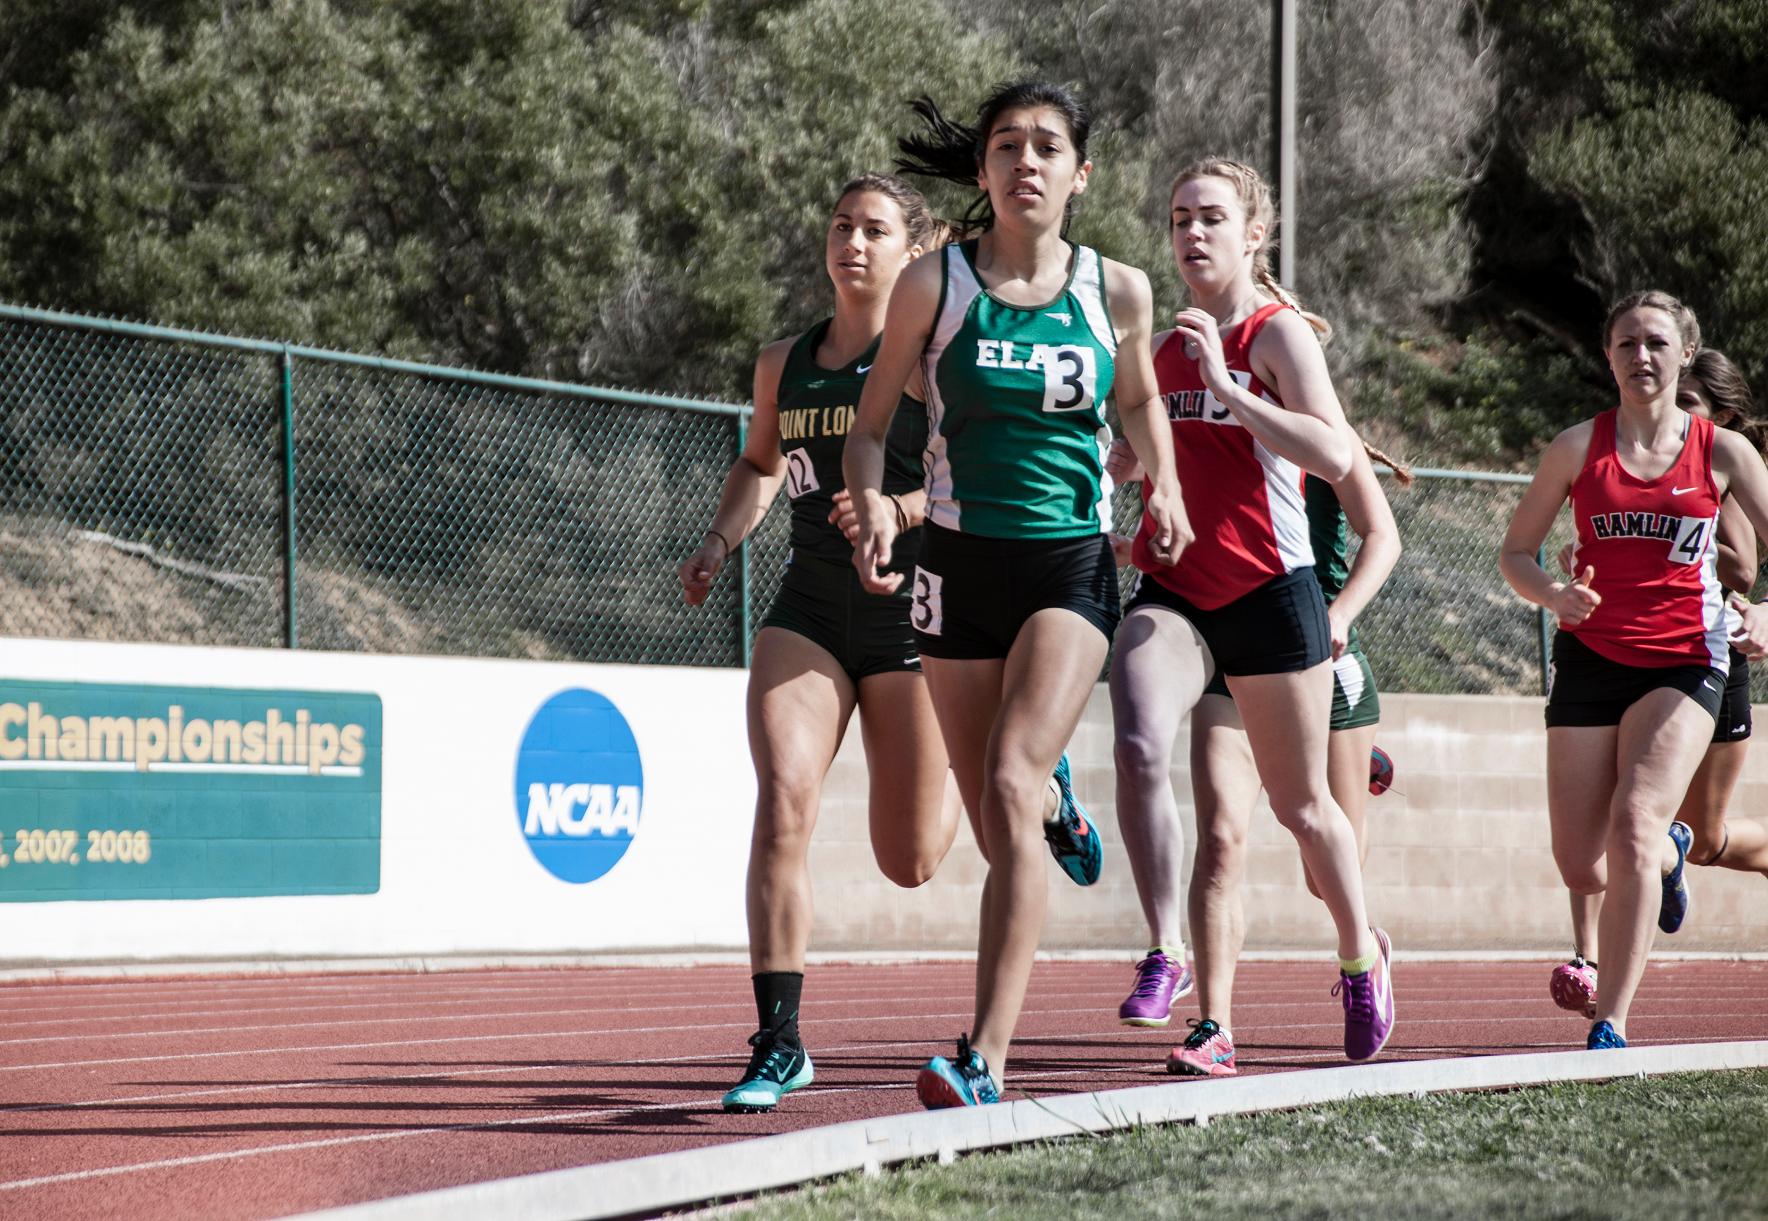 East Lost Angeles College sophomore Ruby Padilla leads the 1,500-meter run in a collegiate meet at Point Loma Nazarene University on March 19.